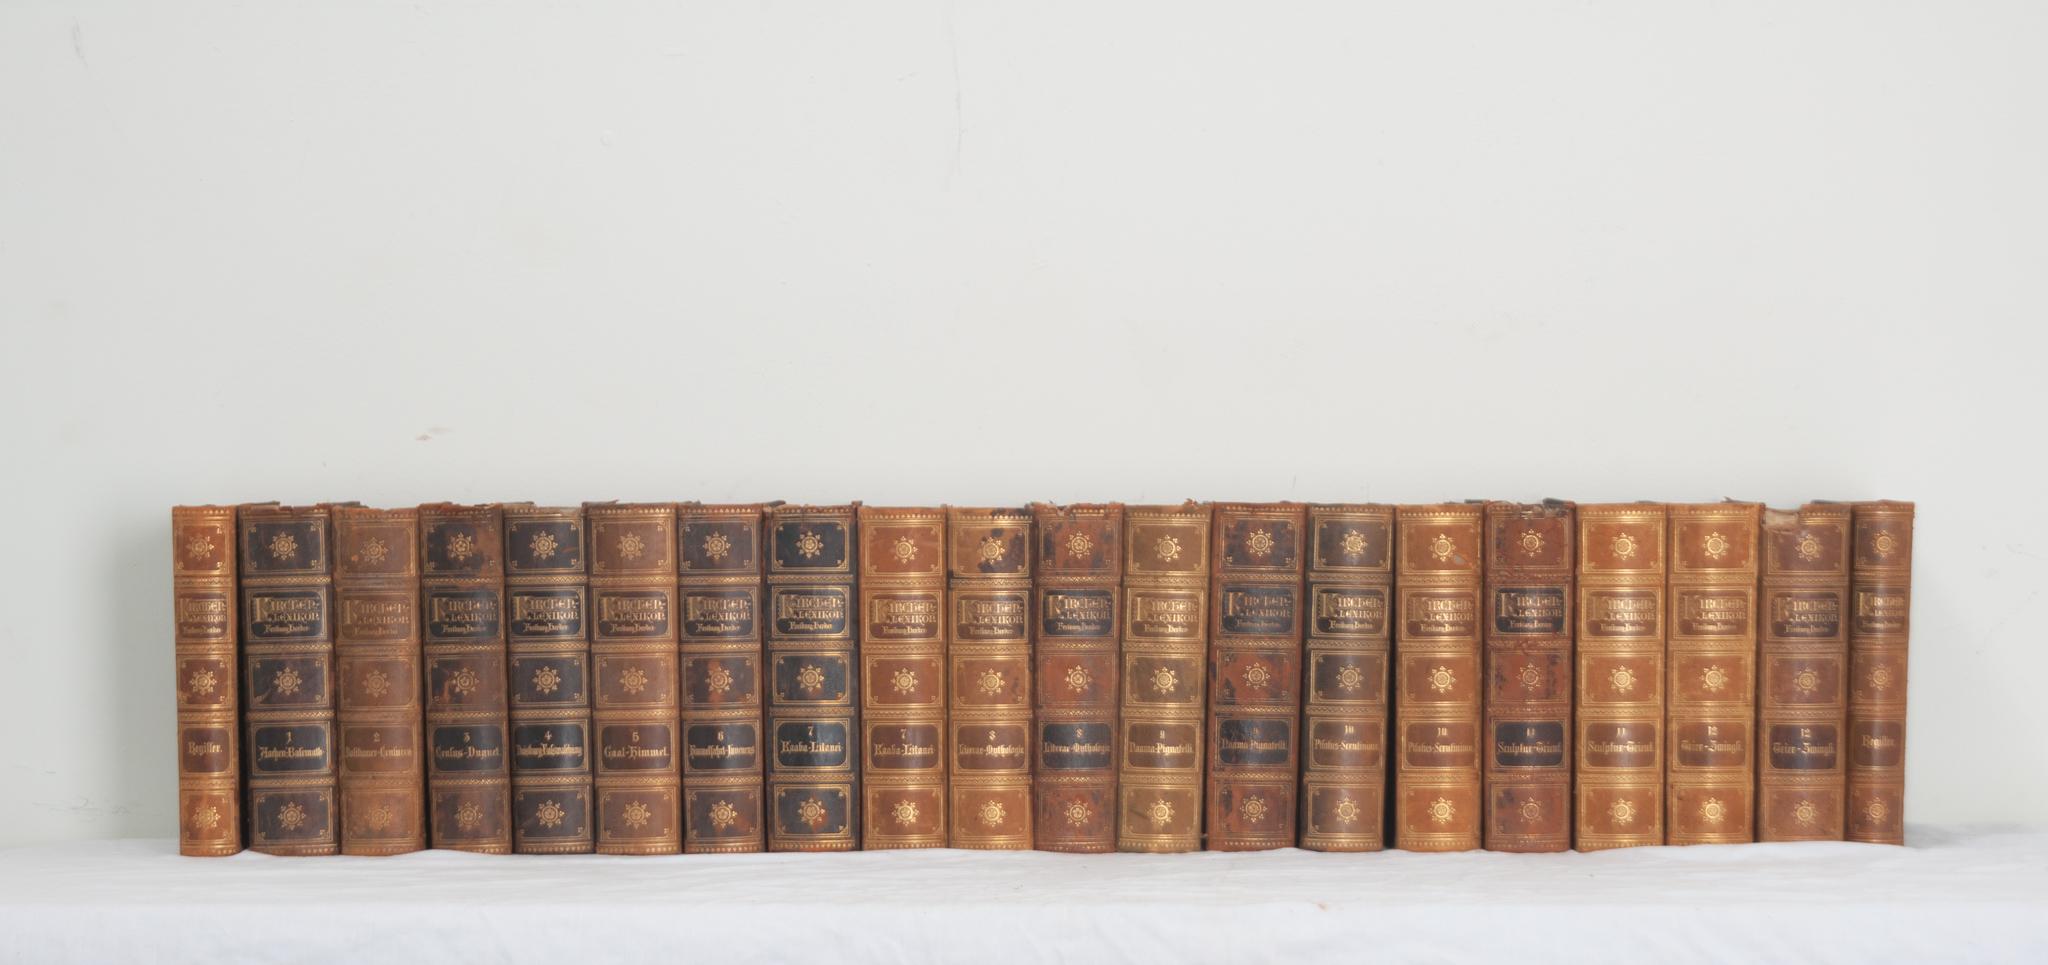 Hand-Crafted Set of 20 German Catholic Encyclopedias For Sale